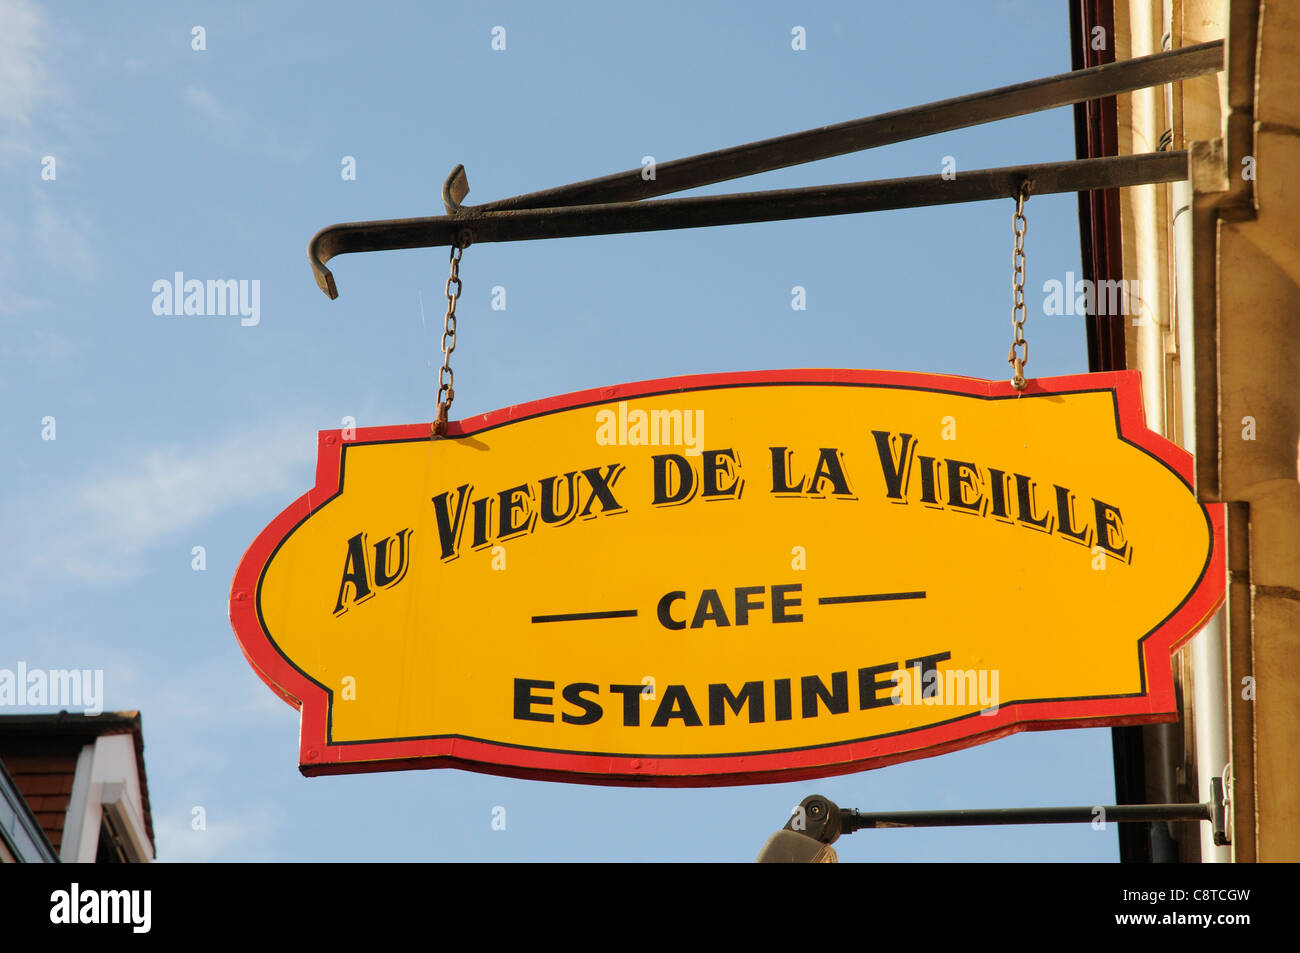 A sign for an estaminet in Lille, France Stock Photo